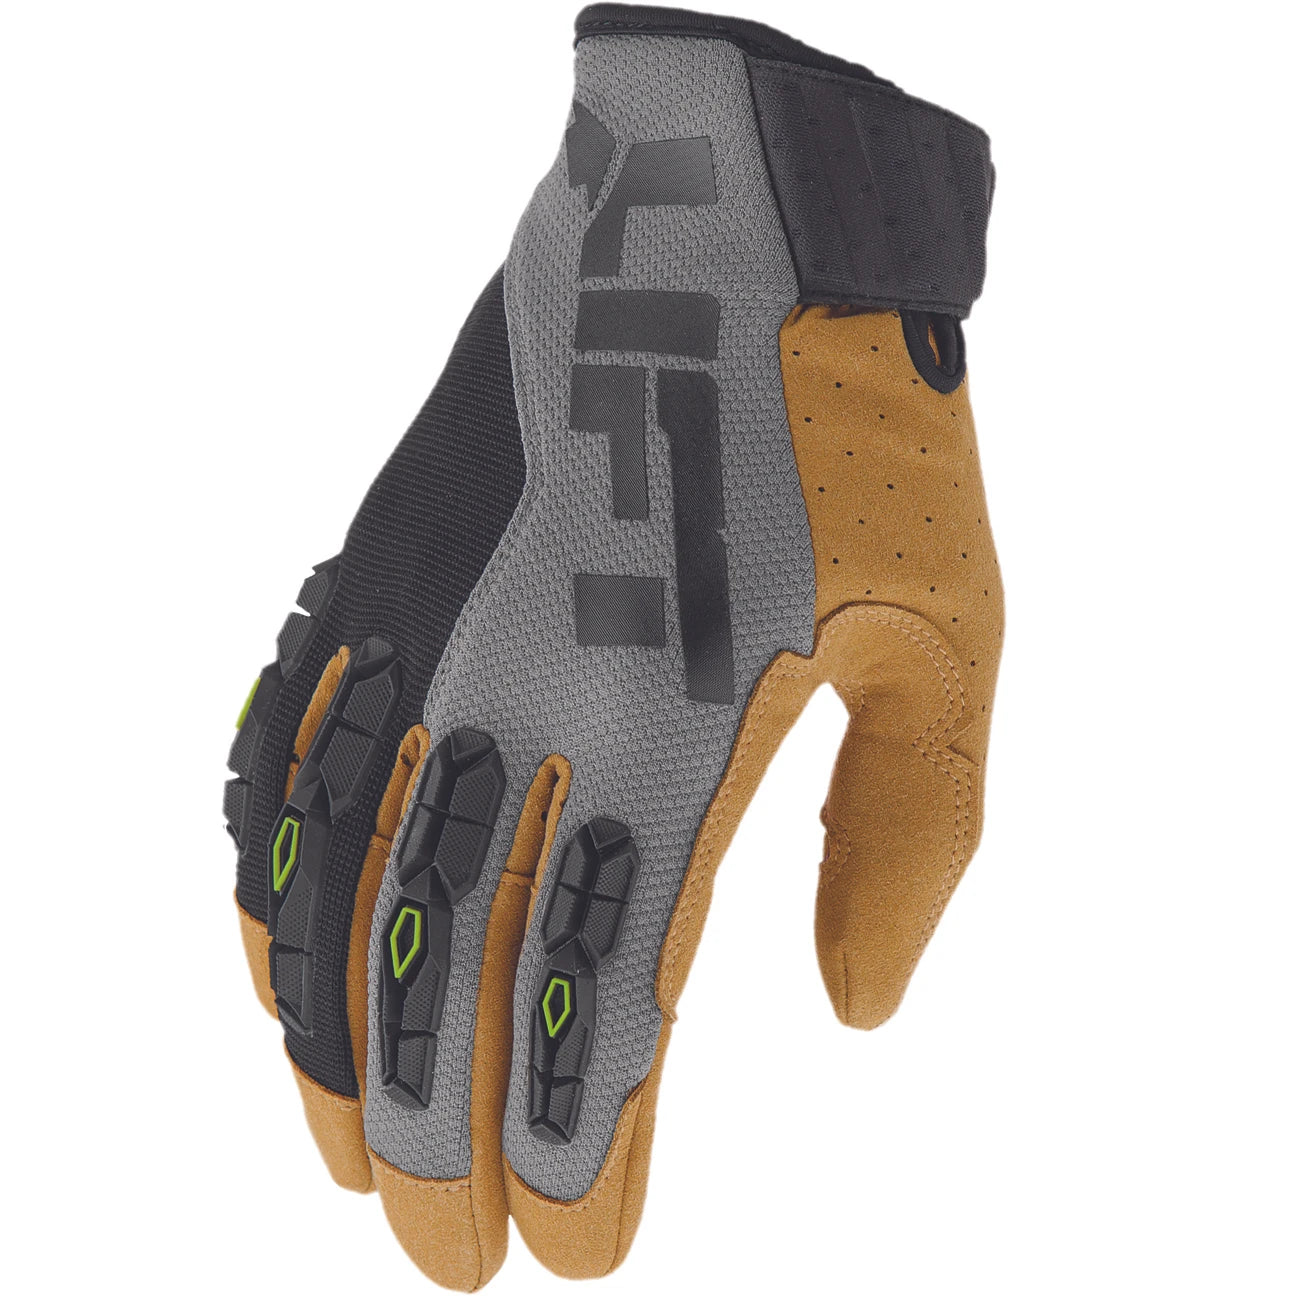 LIFT HANDLER Glove (Grey/Black)- Dual Layer Fused Silicone Palm/Fingers